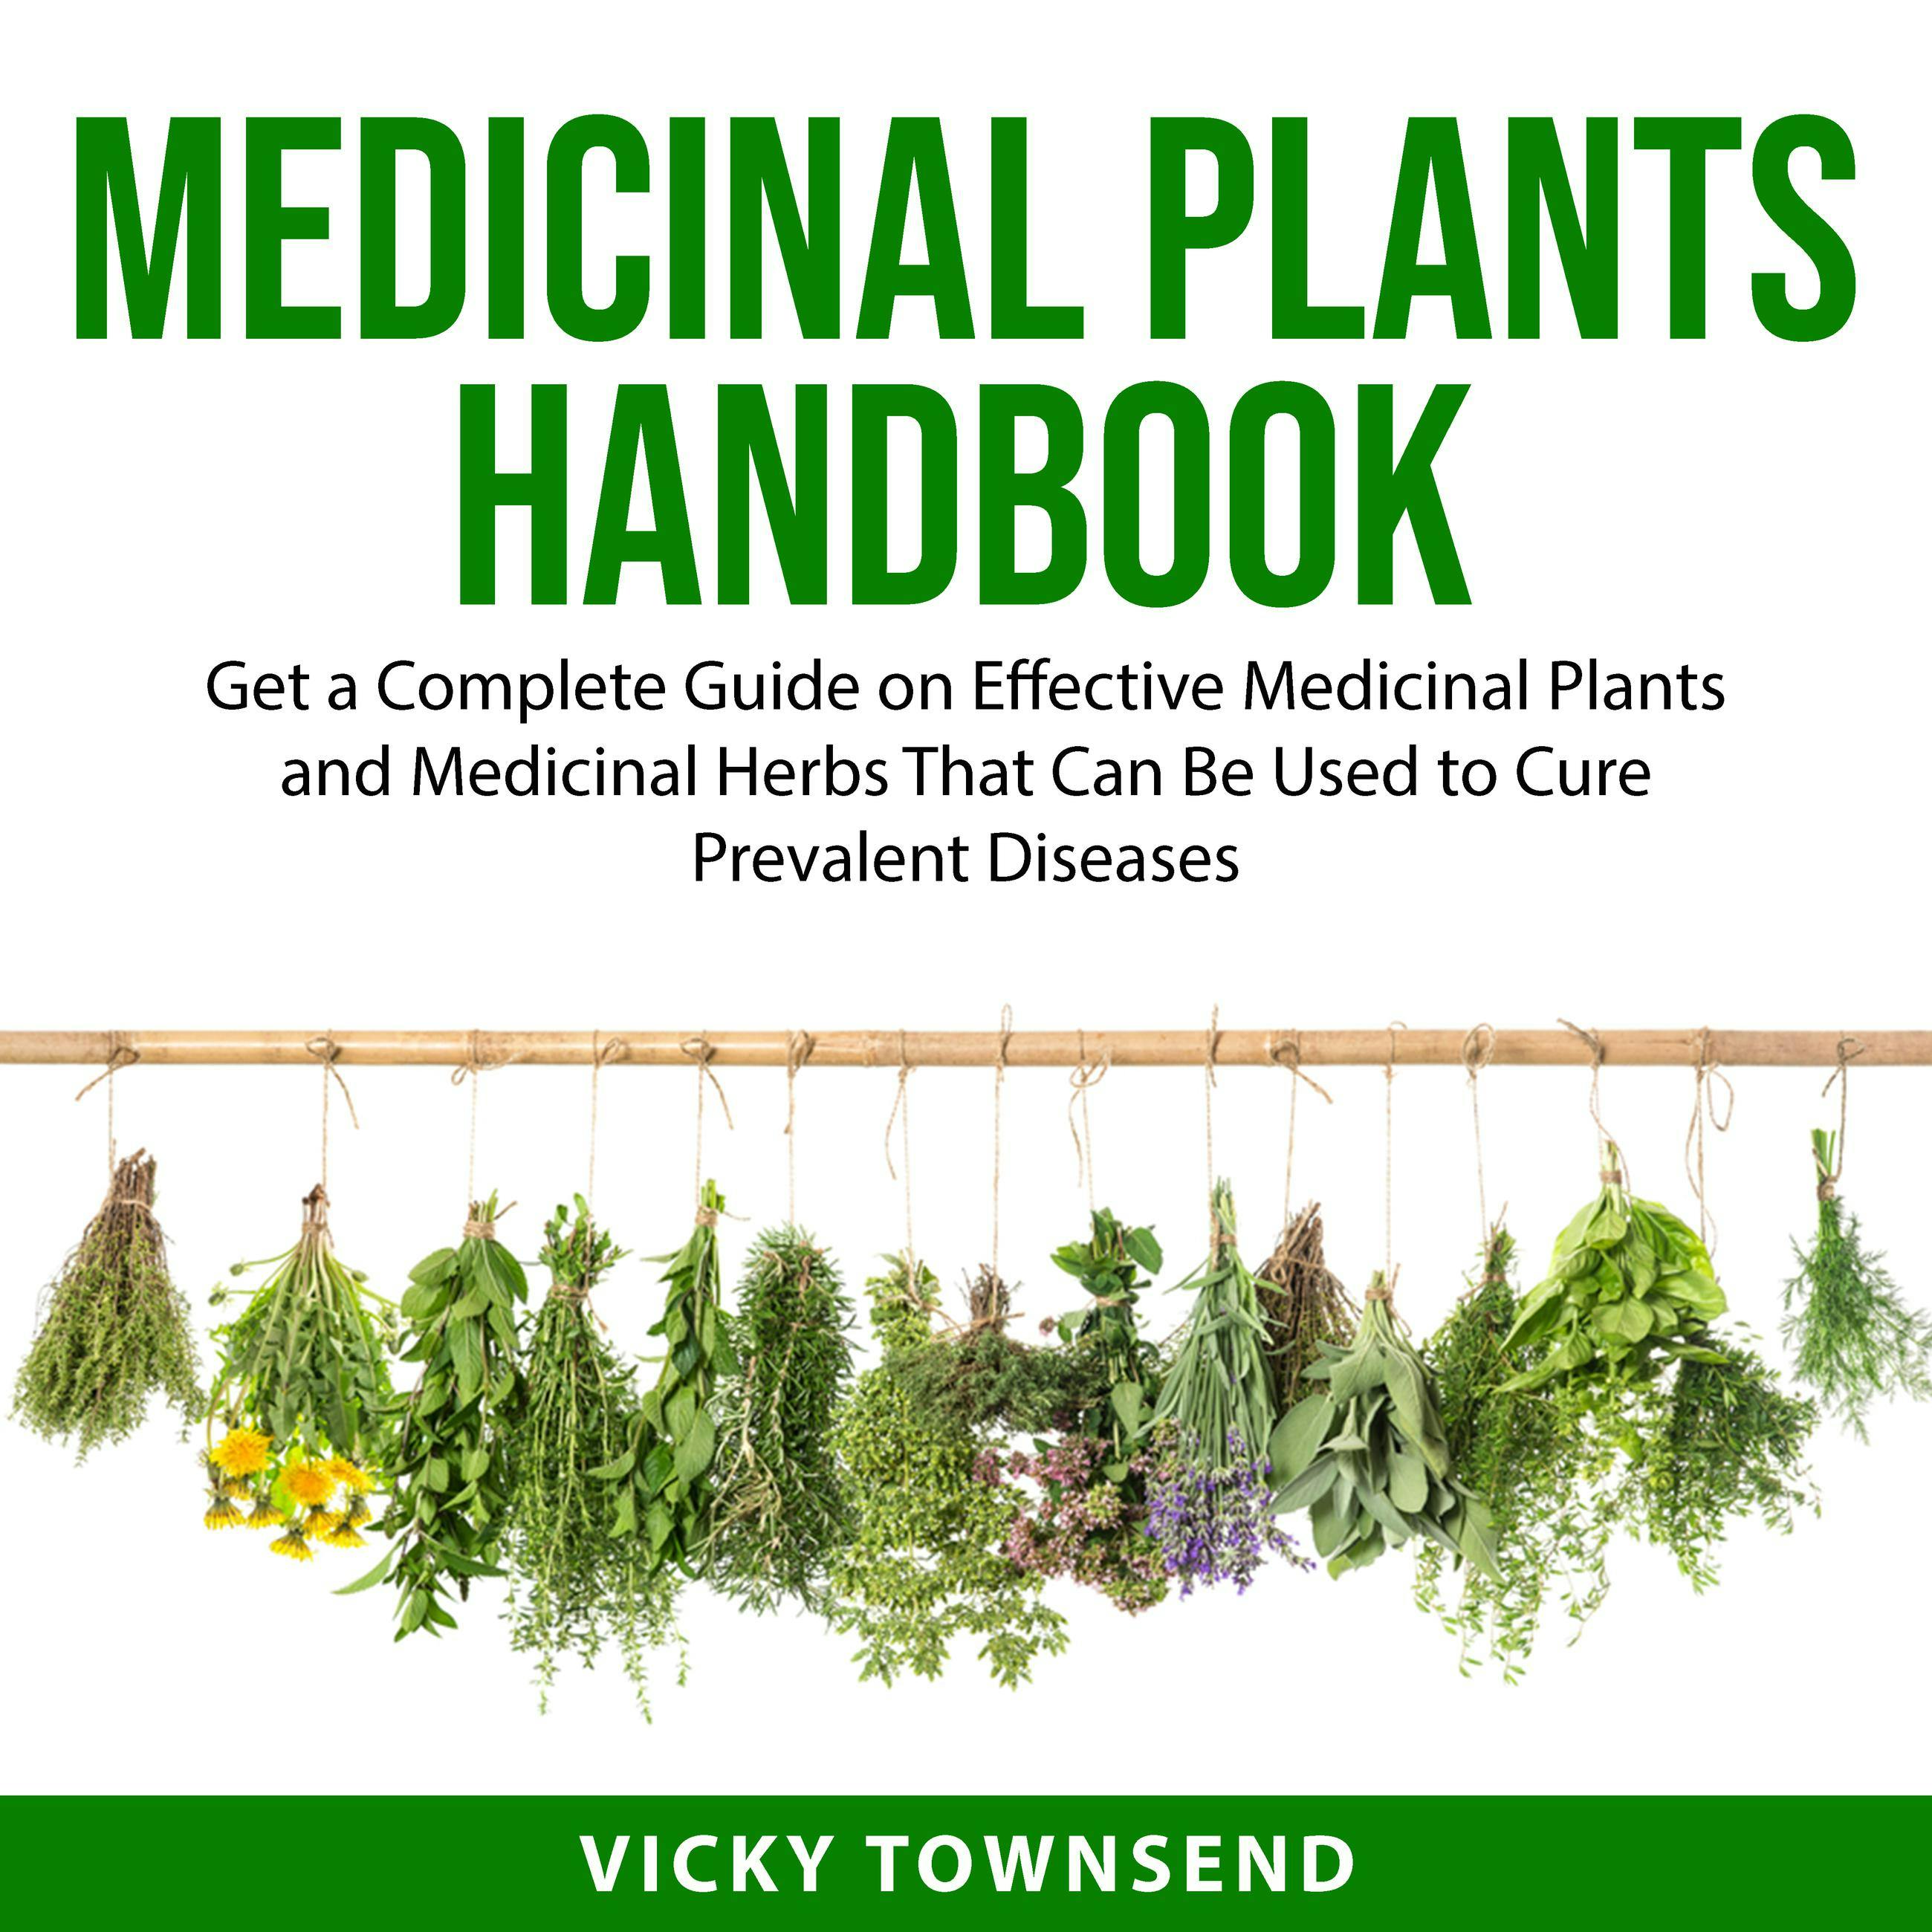 Medicinal Plants Handbook: Get a Complete Guide on Effective Medicinal Plants and Medicinal Herbs That Can Be Used to Cure Prevalent Diseases - undefined